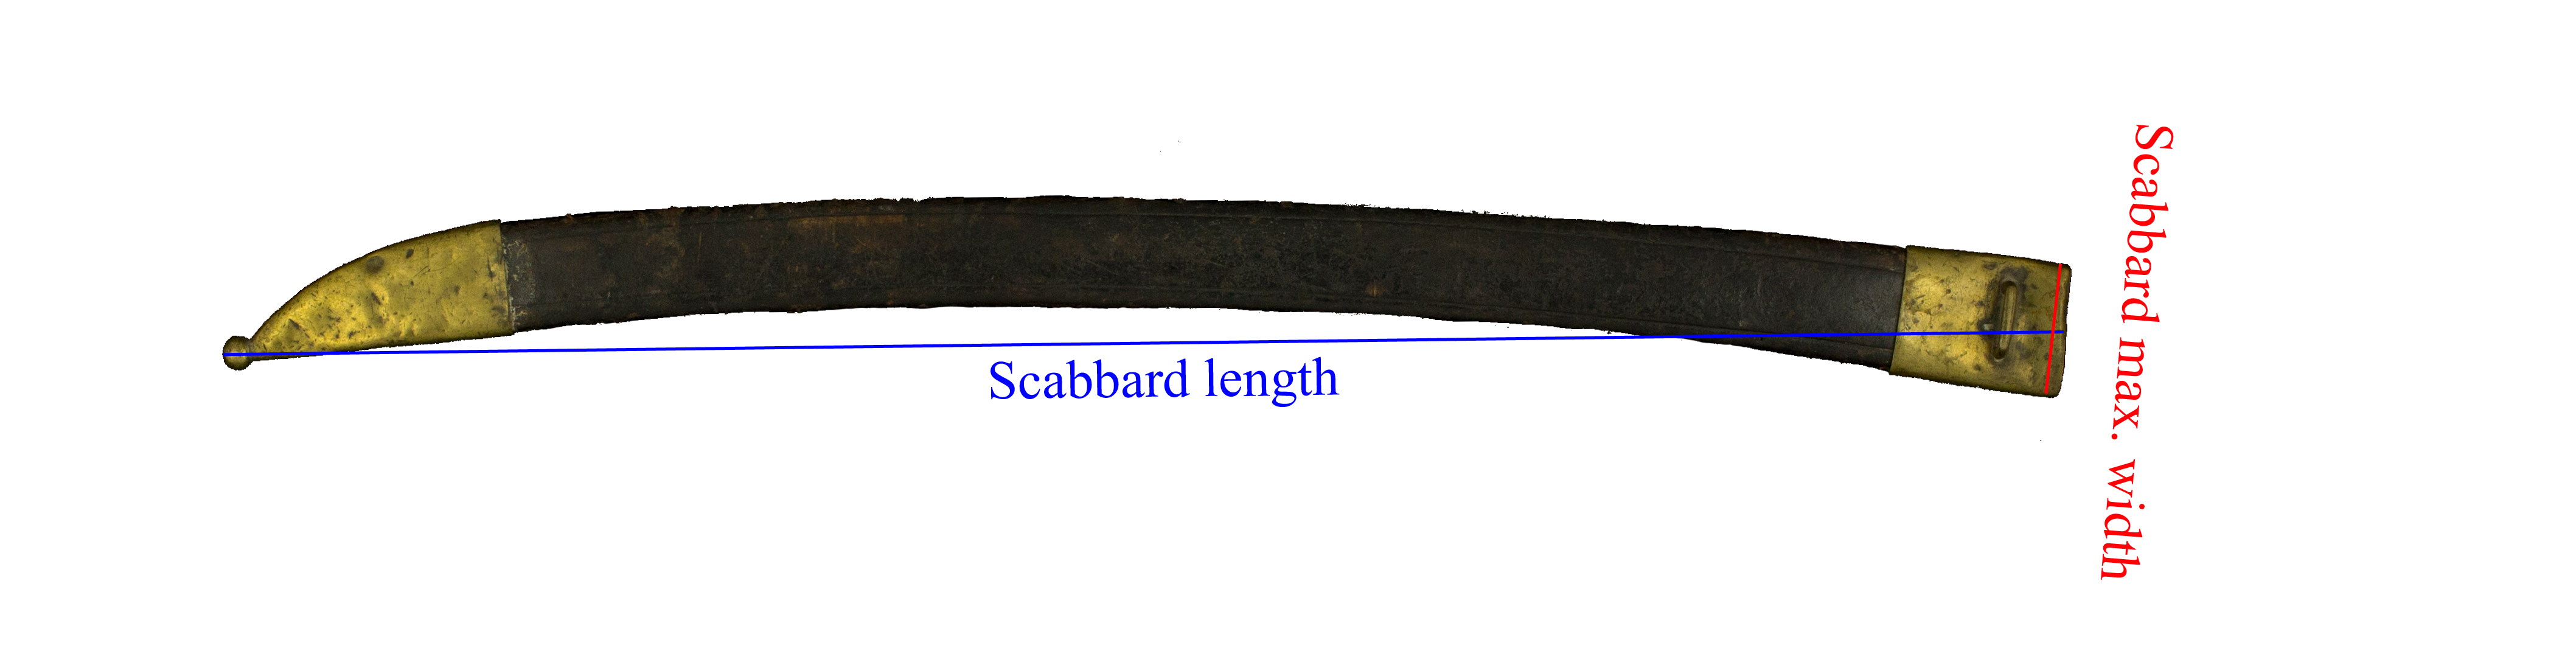 Curved scabbard length